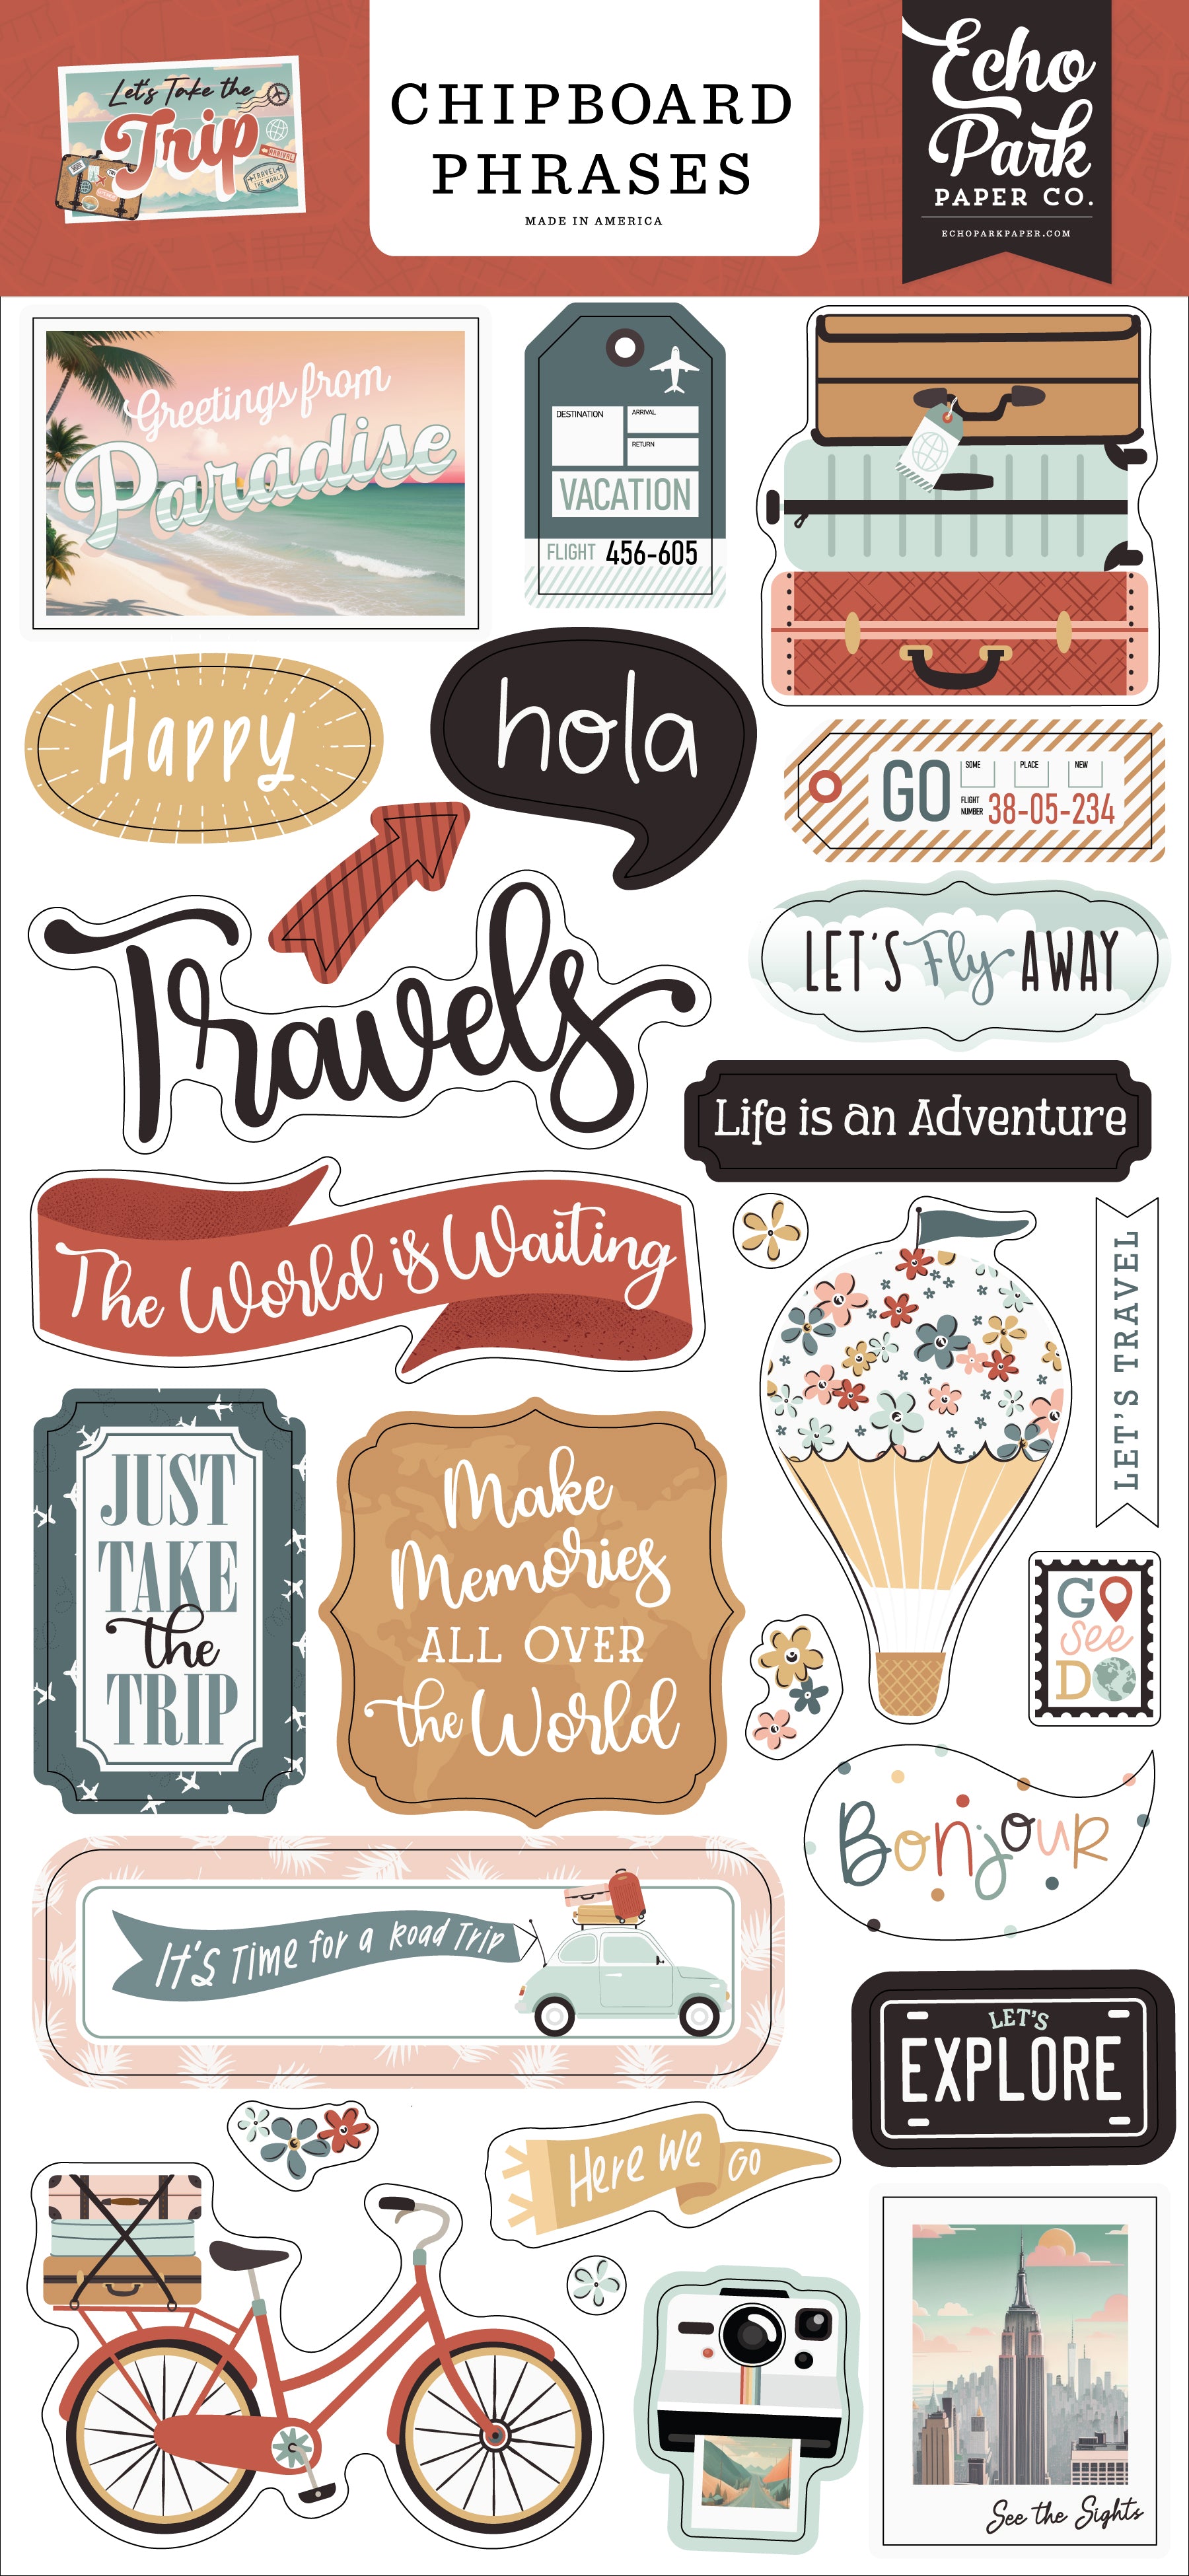 Let's Take the Trip Collection 6x12 Scrapbook Chipboard Phrases by Echo Park Paper